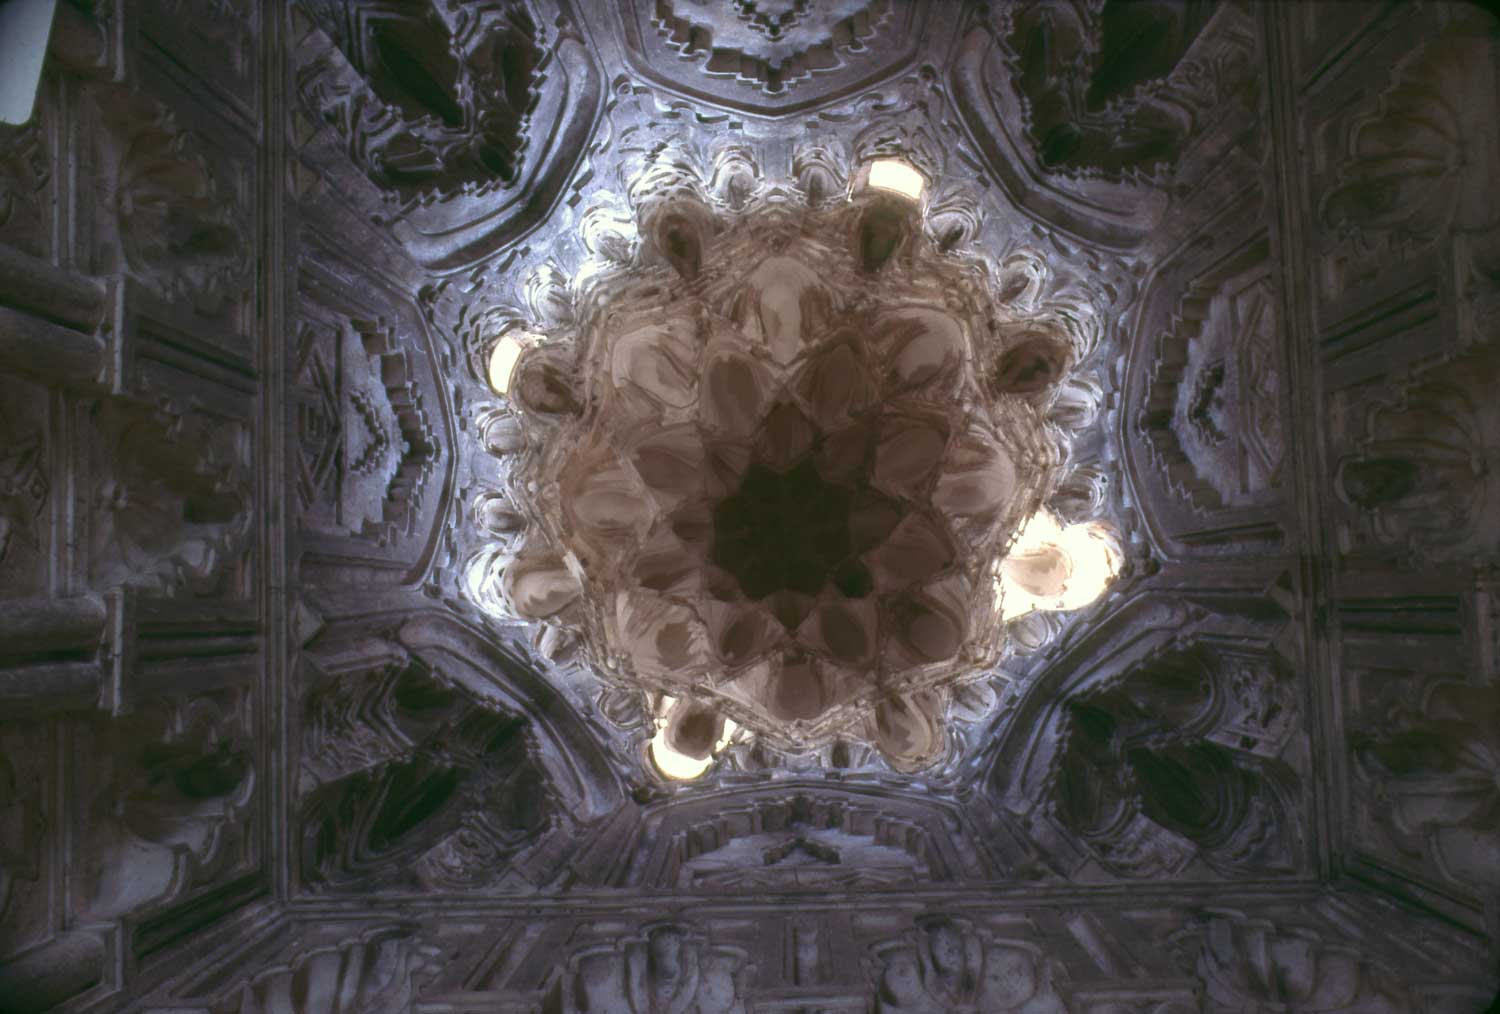 Interior view showing the muqarnas dome